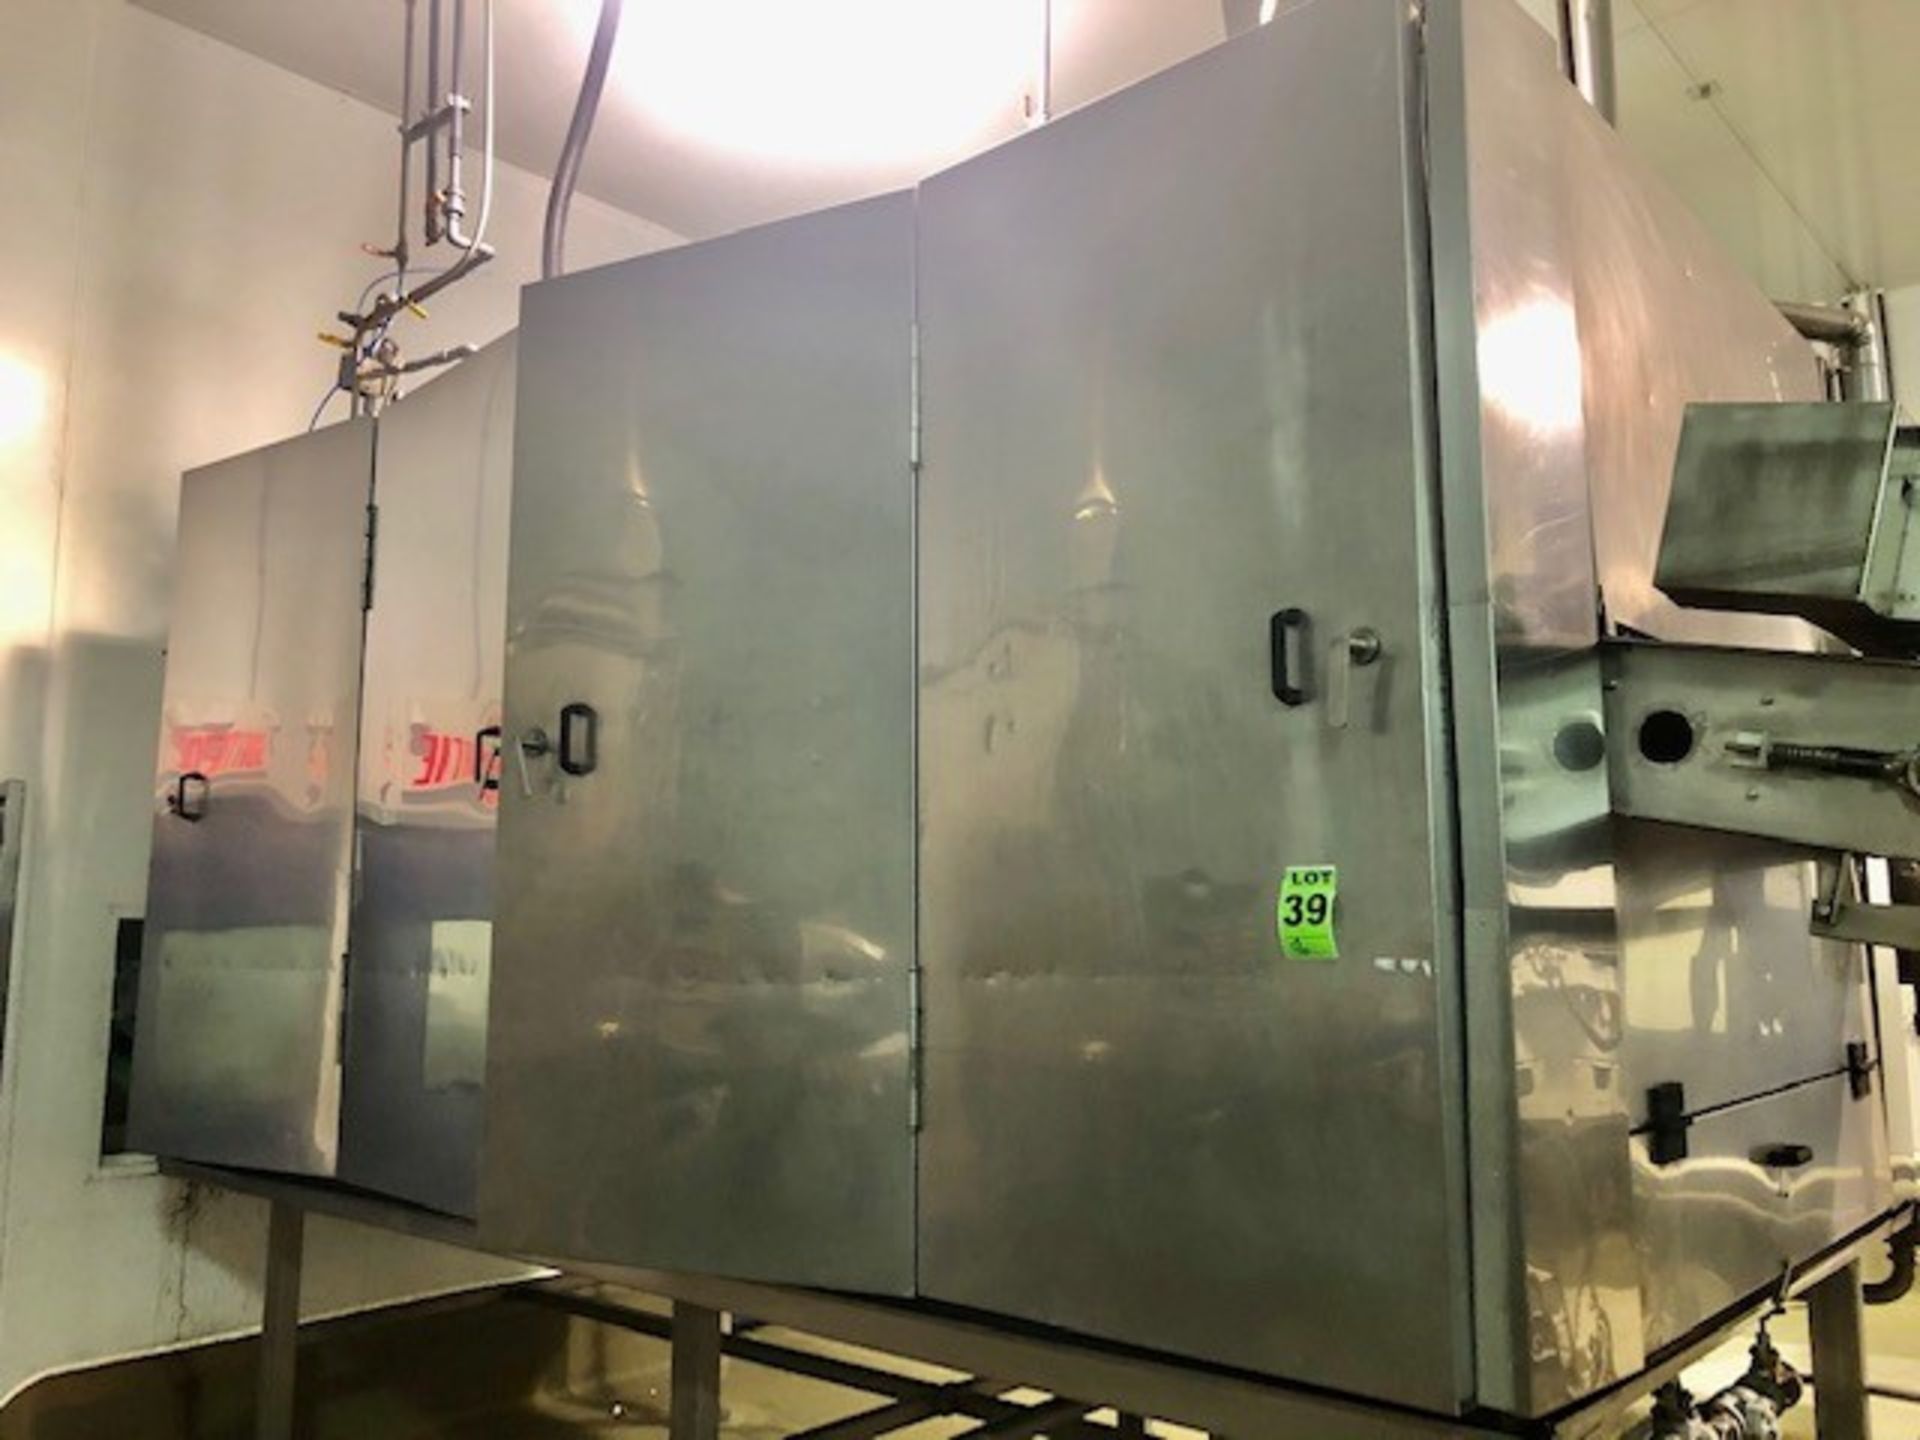 PASTA TECHNOLOGIES GROUP 3-Tier conveyor dryer Mod. INT-40-3-15, S/N 005081102 including temp and